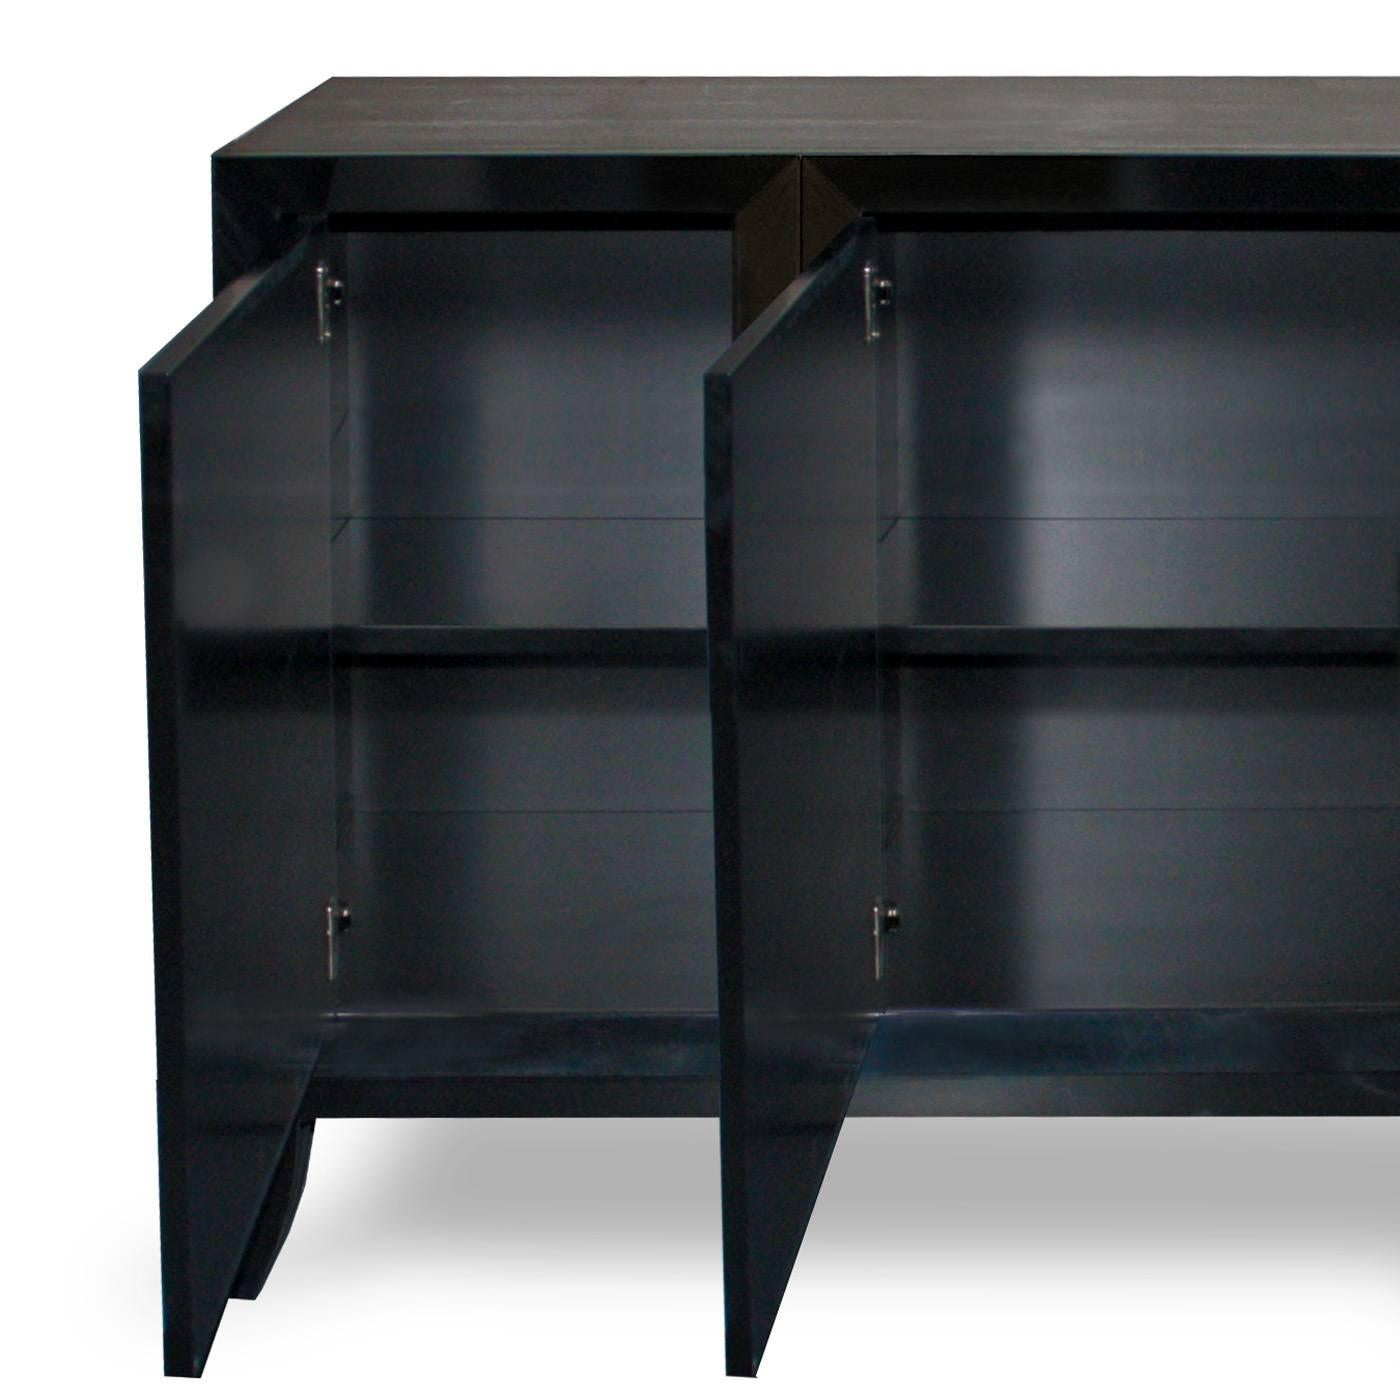 This four-door sideboard, is beautifully crafted by the finest Italian artisans and is finished in a hard, super sleek black gloss lacquer. The carved wooden leaf shaped handle, with the intense effect of the hand-applied silver leaf, offers a